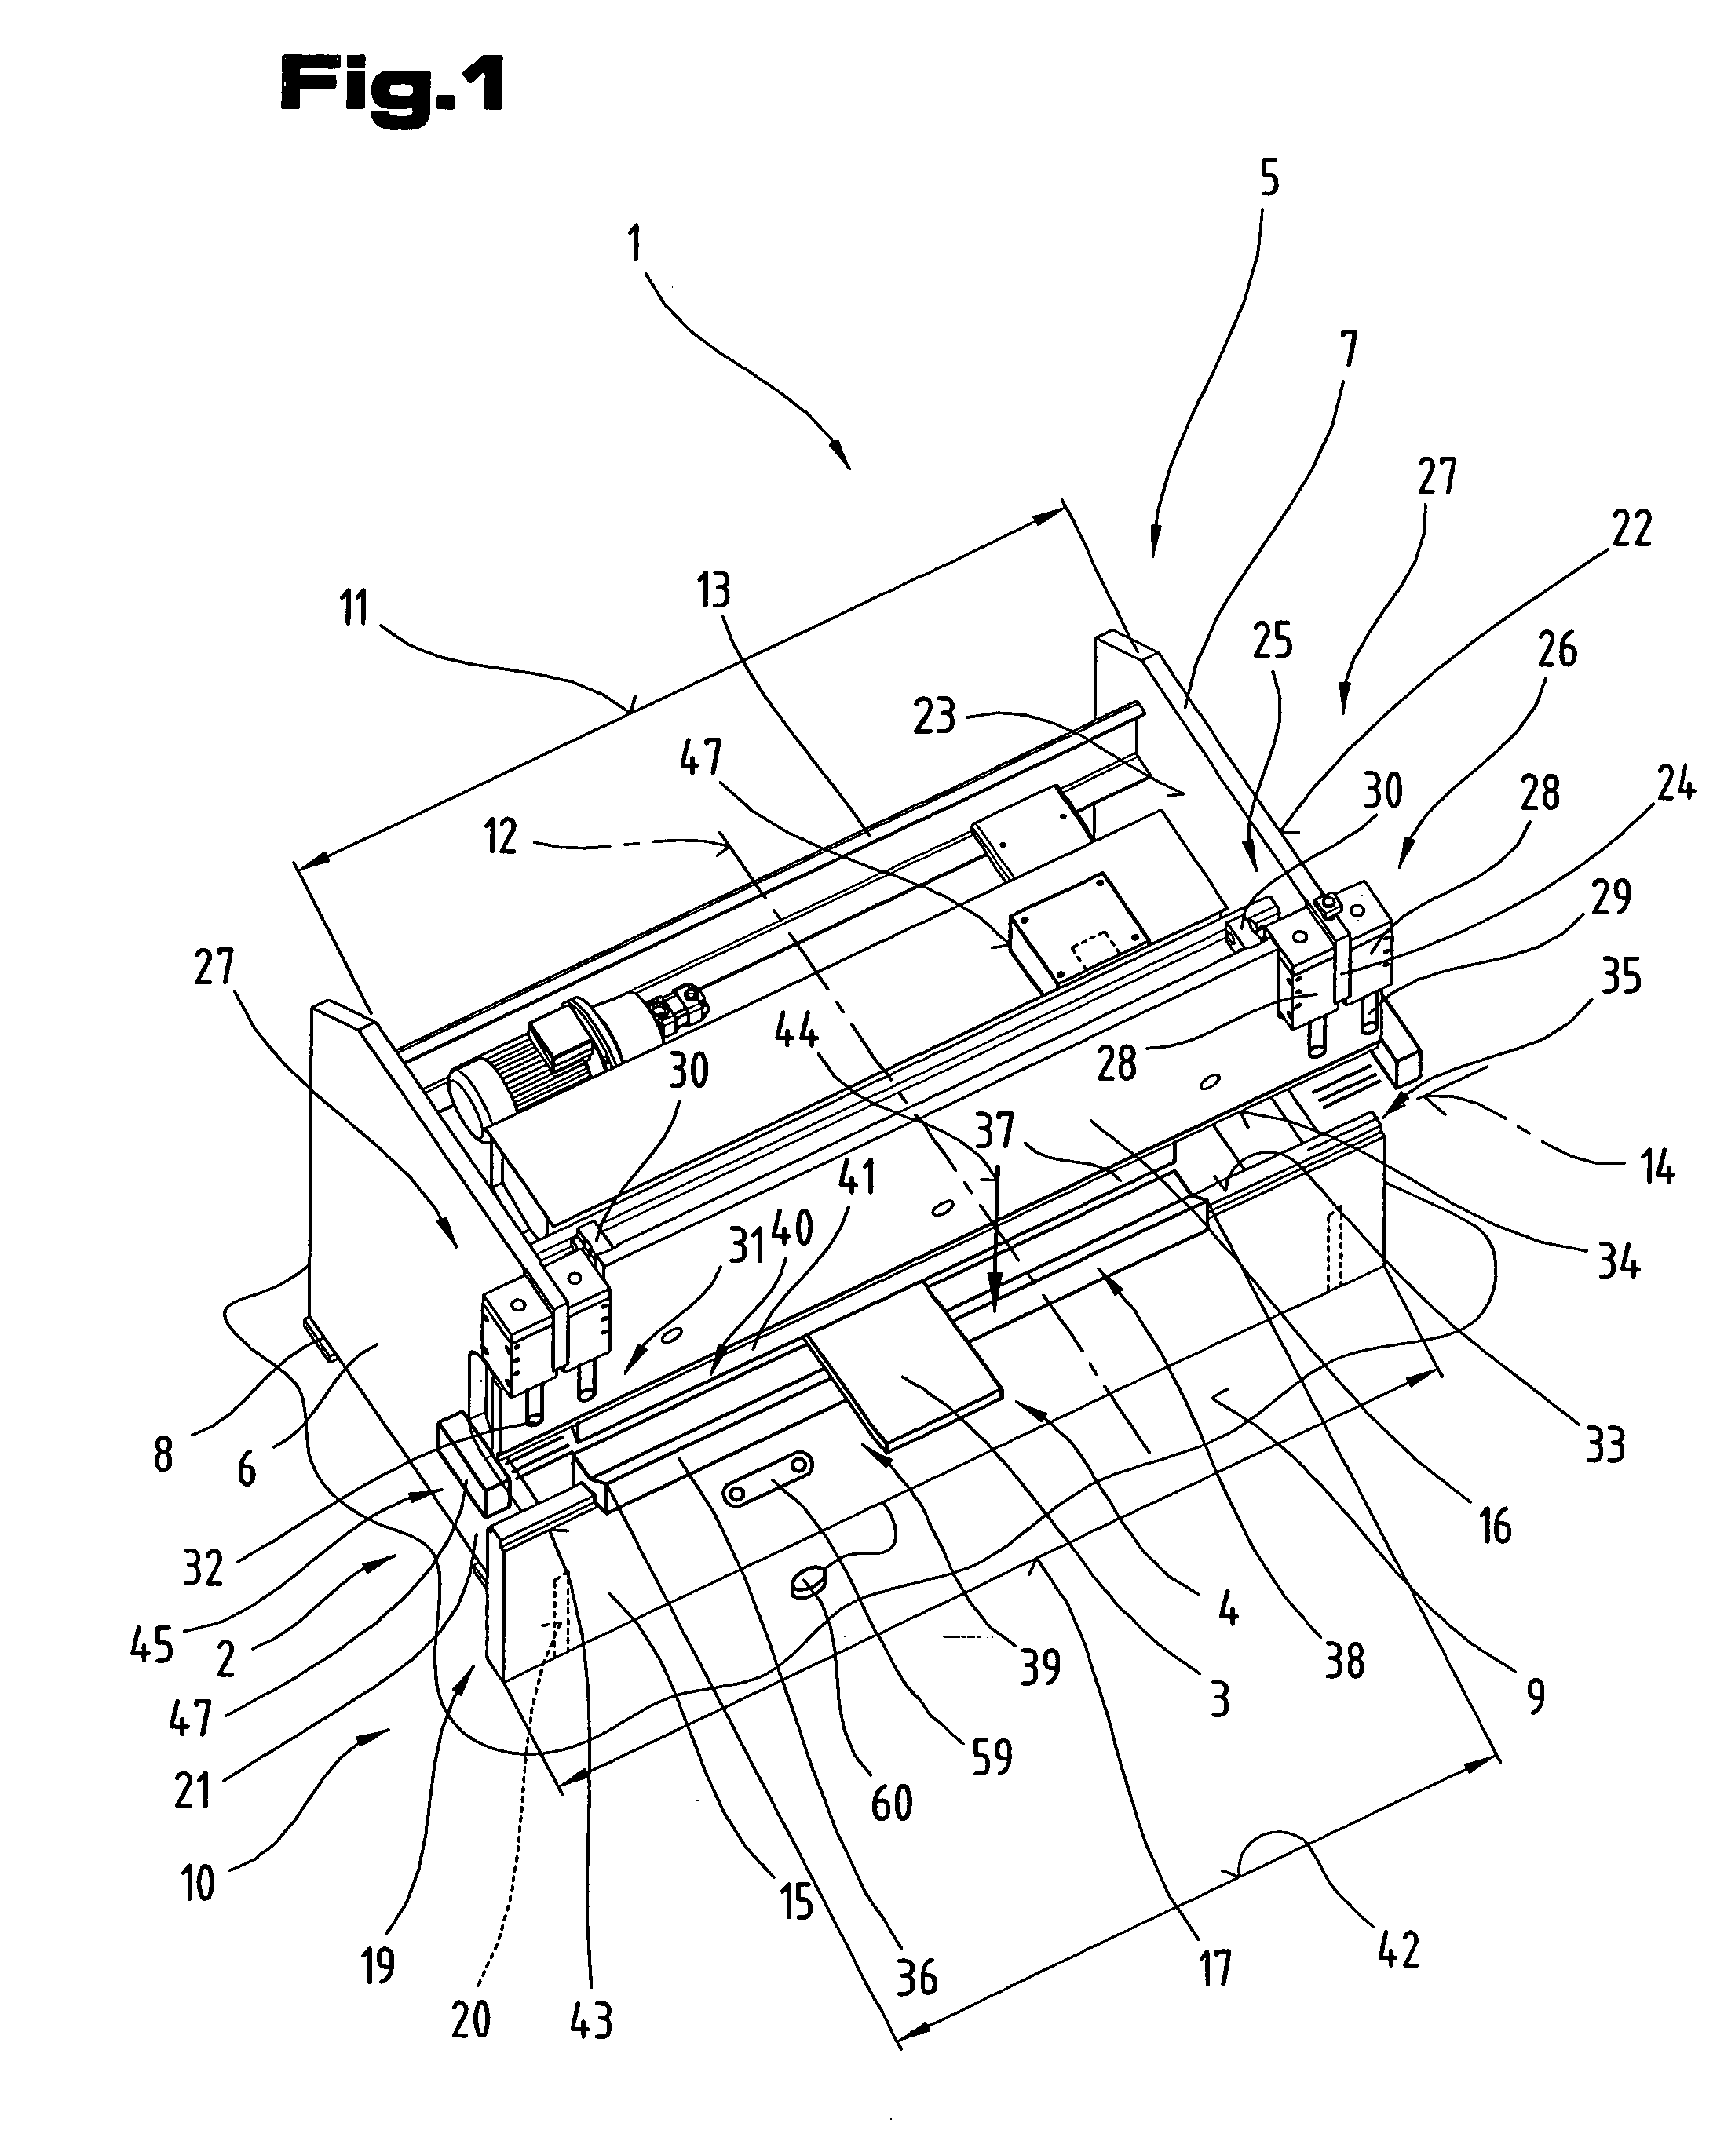 Production device, in particular a folding press and a method for operating a production device